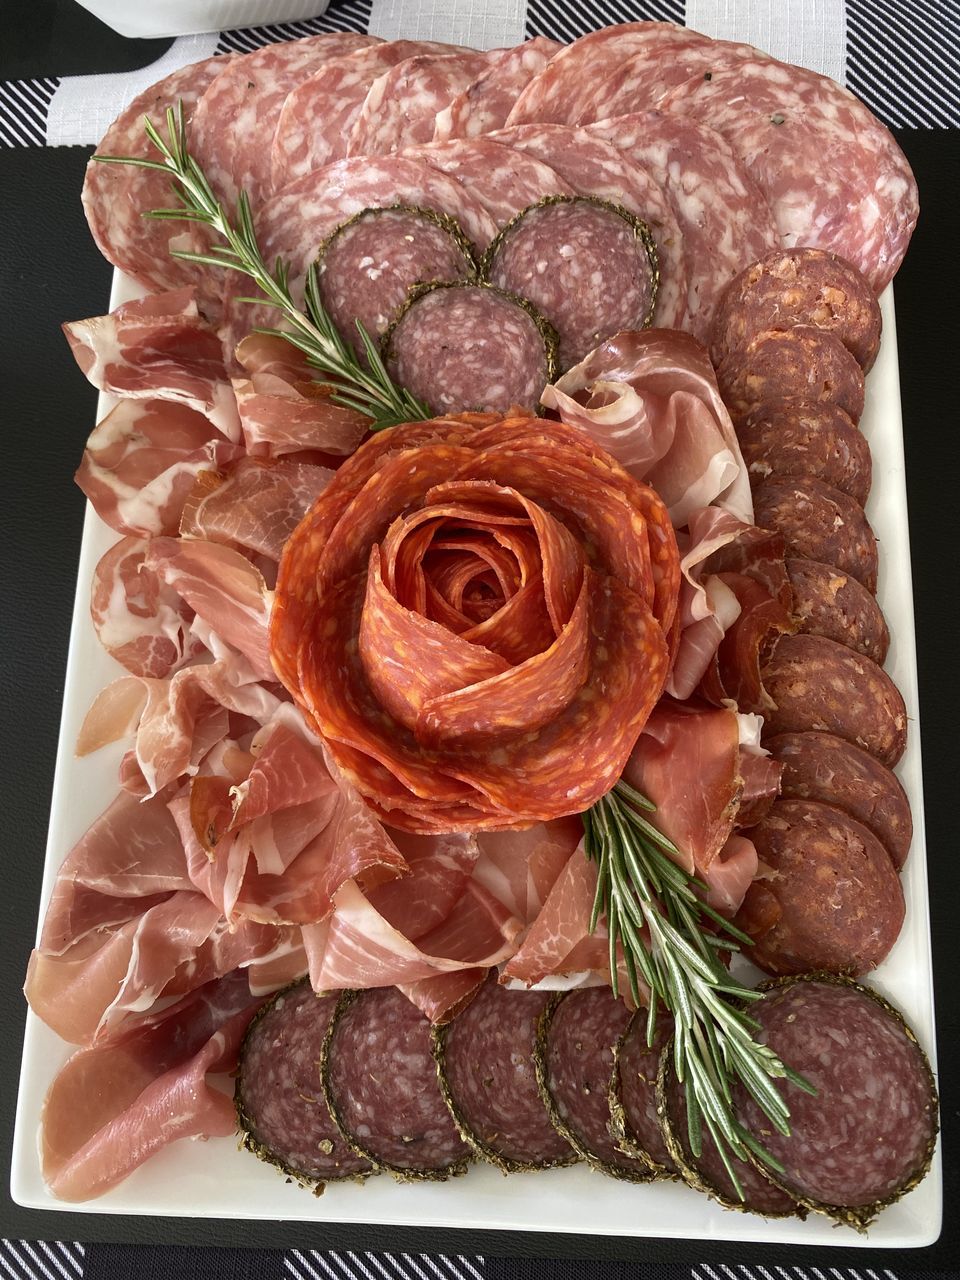 meat, food and drink, food, lamb and mutton, freshness, capicola, prosciutto, cooking, ham, directly above, indoors, no people, kobe beef, vegetable, processed meat, high angle view, dish, kielbasa, plant, still life, healthy eating, pork, cuisine, jamón serrano, herb, red meat